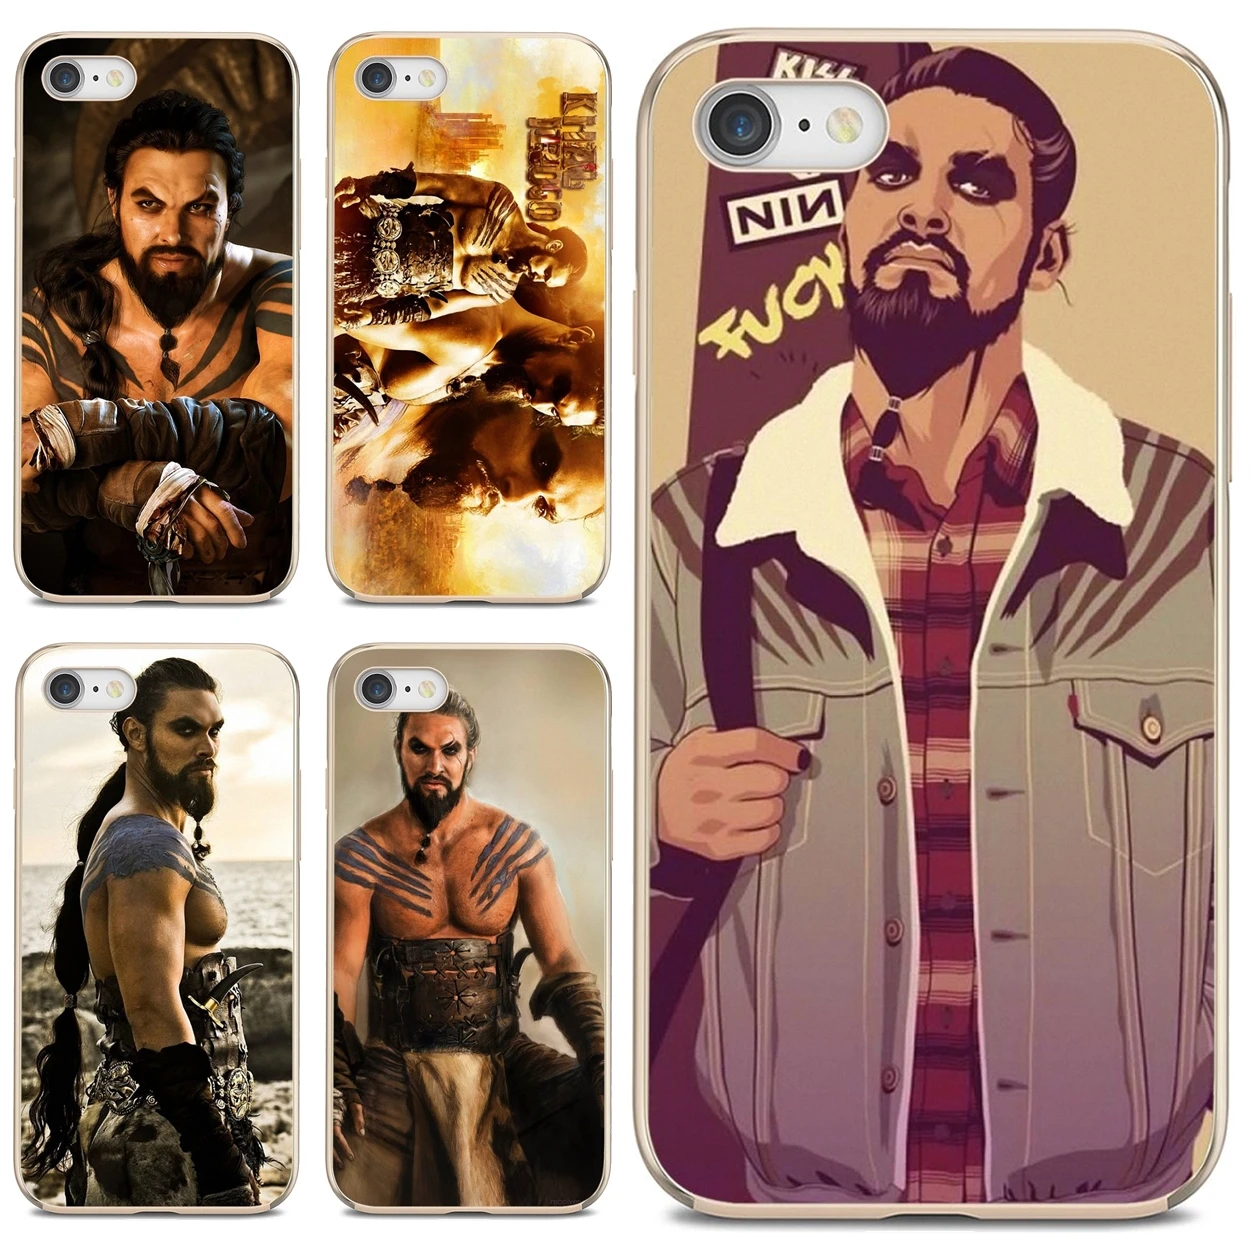 

khal-drogo-Jason-Momoa-USA-Star For iPod Touch iPhone 10 11 12 Pro 4S 5S SE 5C 6 6S 7 8 X XR XS Plus Max 2020 Soft Covers